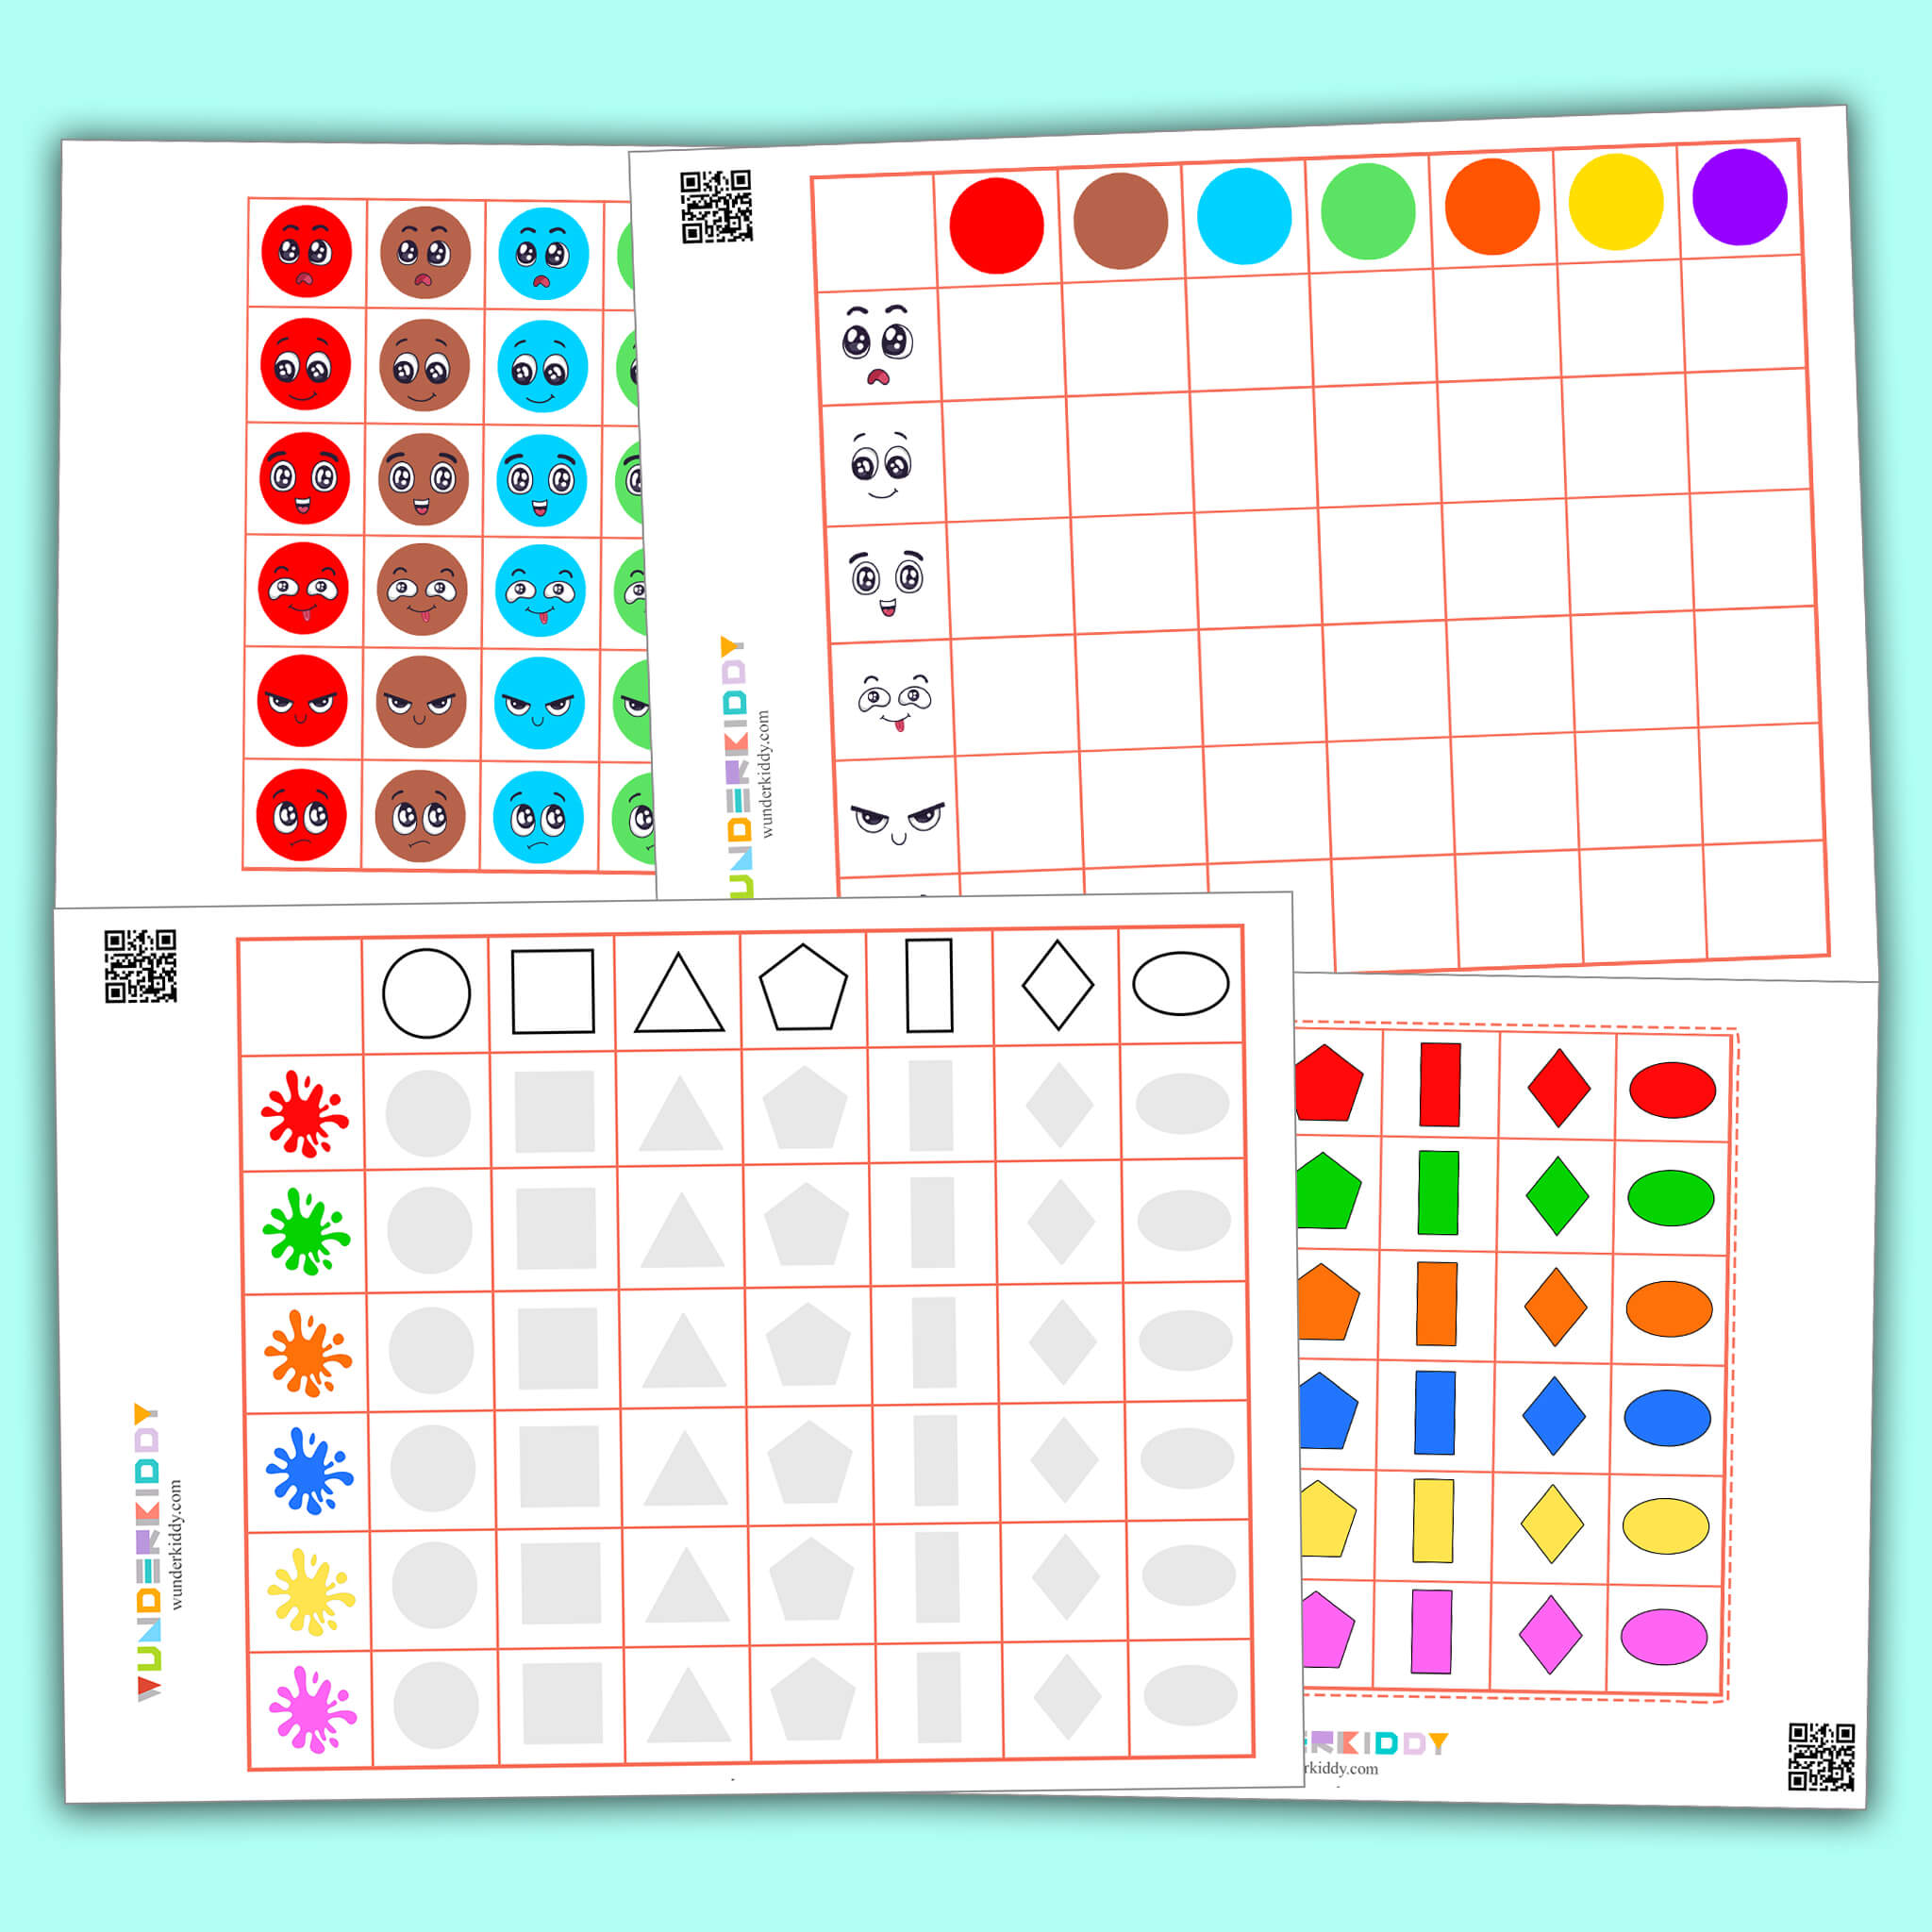 Logic Tables to Learn Shapes and Colors in Kindergarten